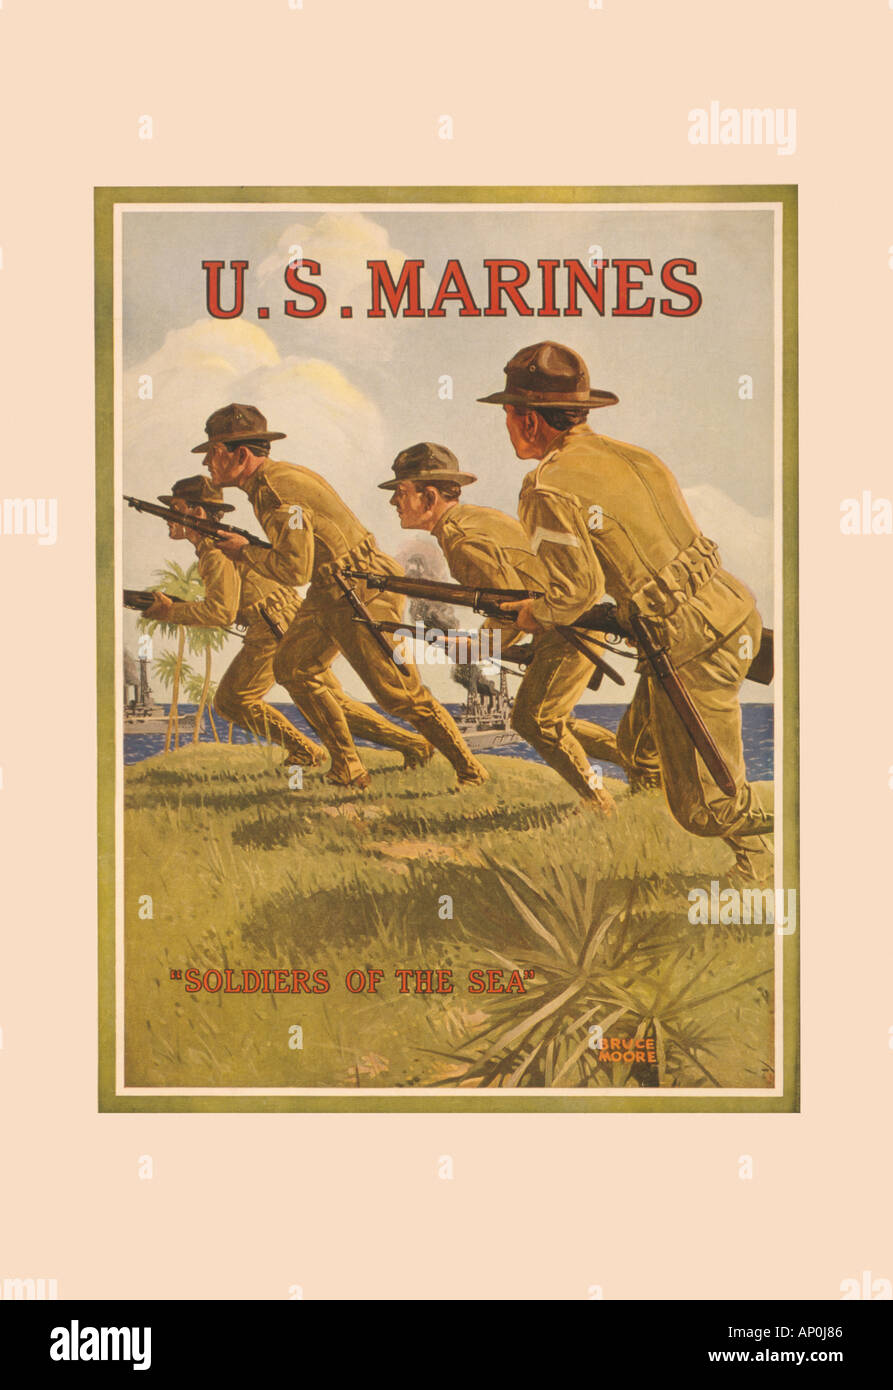 U.S. Marines 'Soldiers of the Sea' Stock Photo